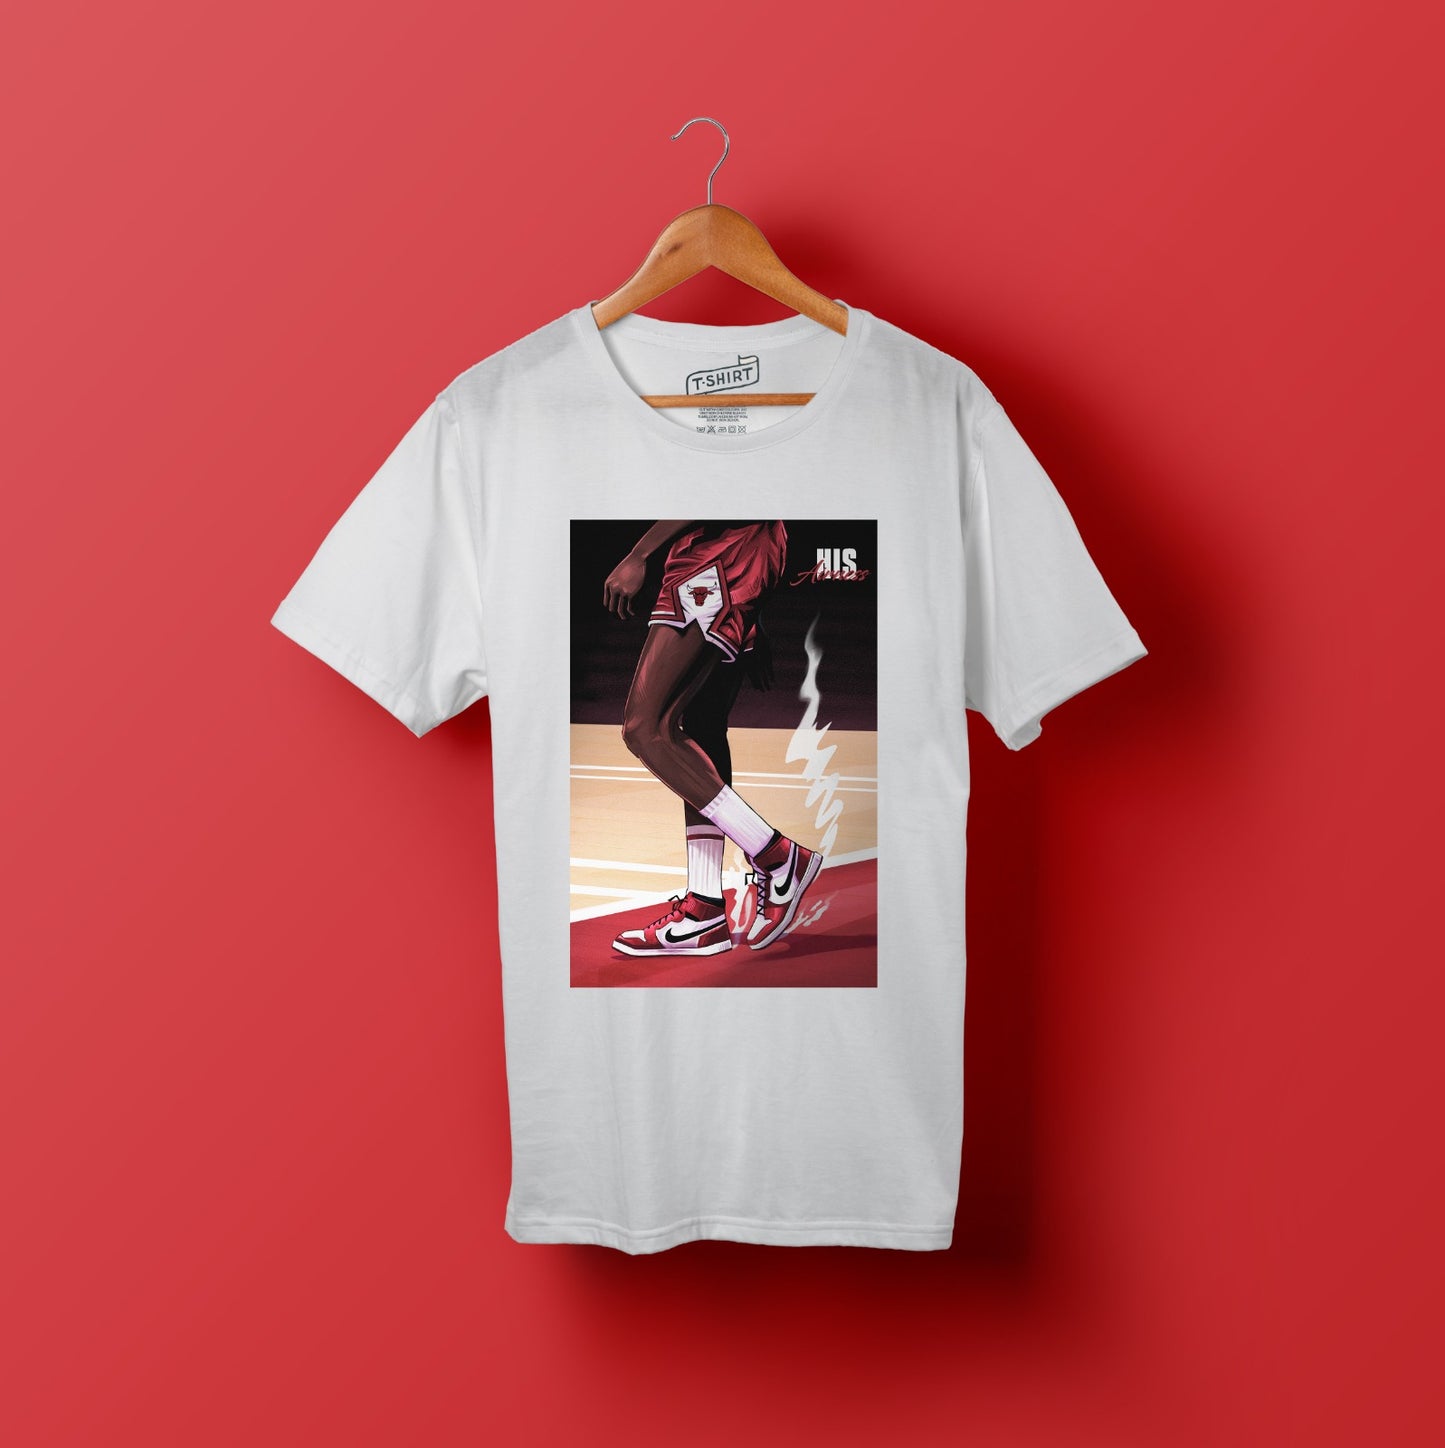 His Airness T-Shirt